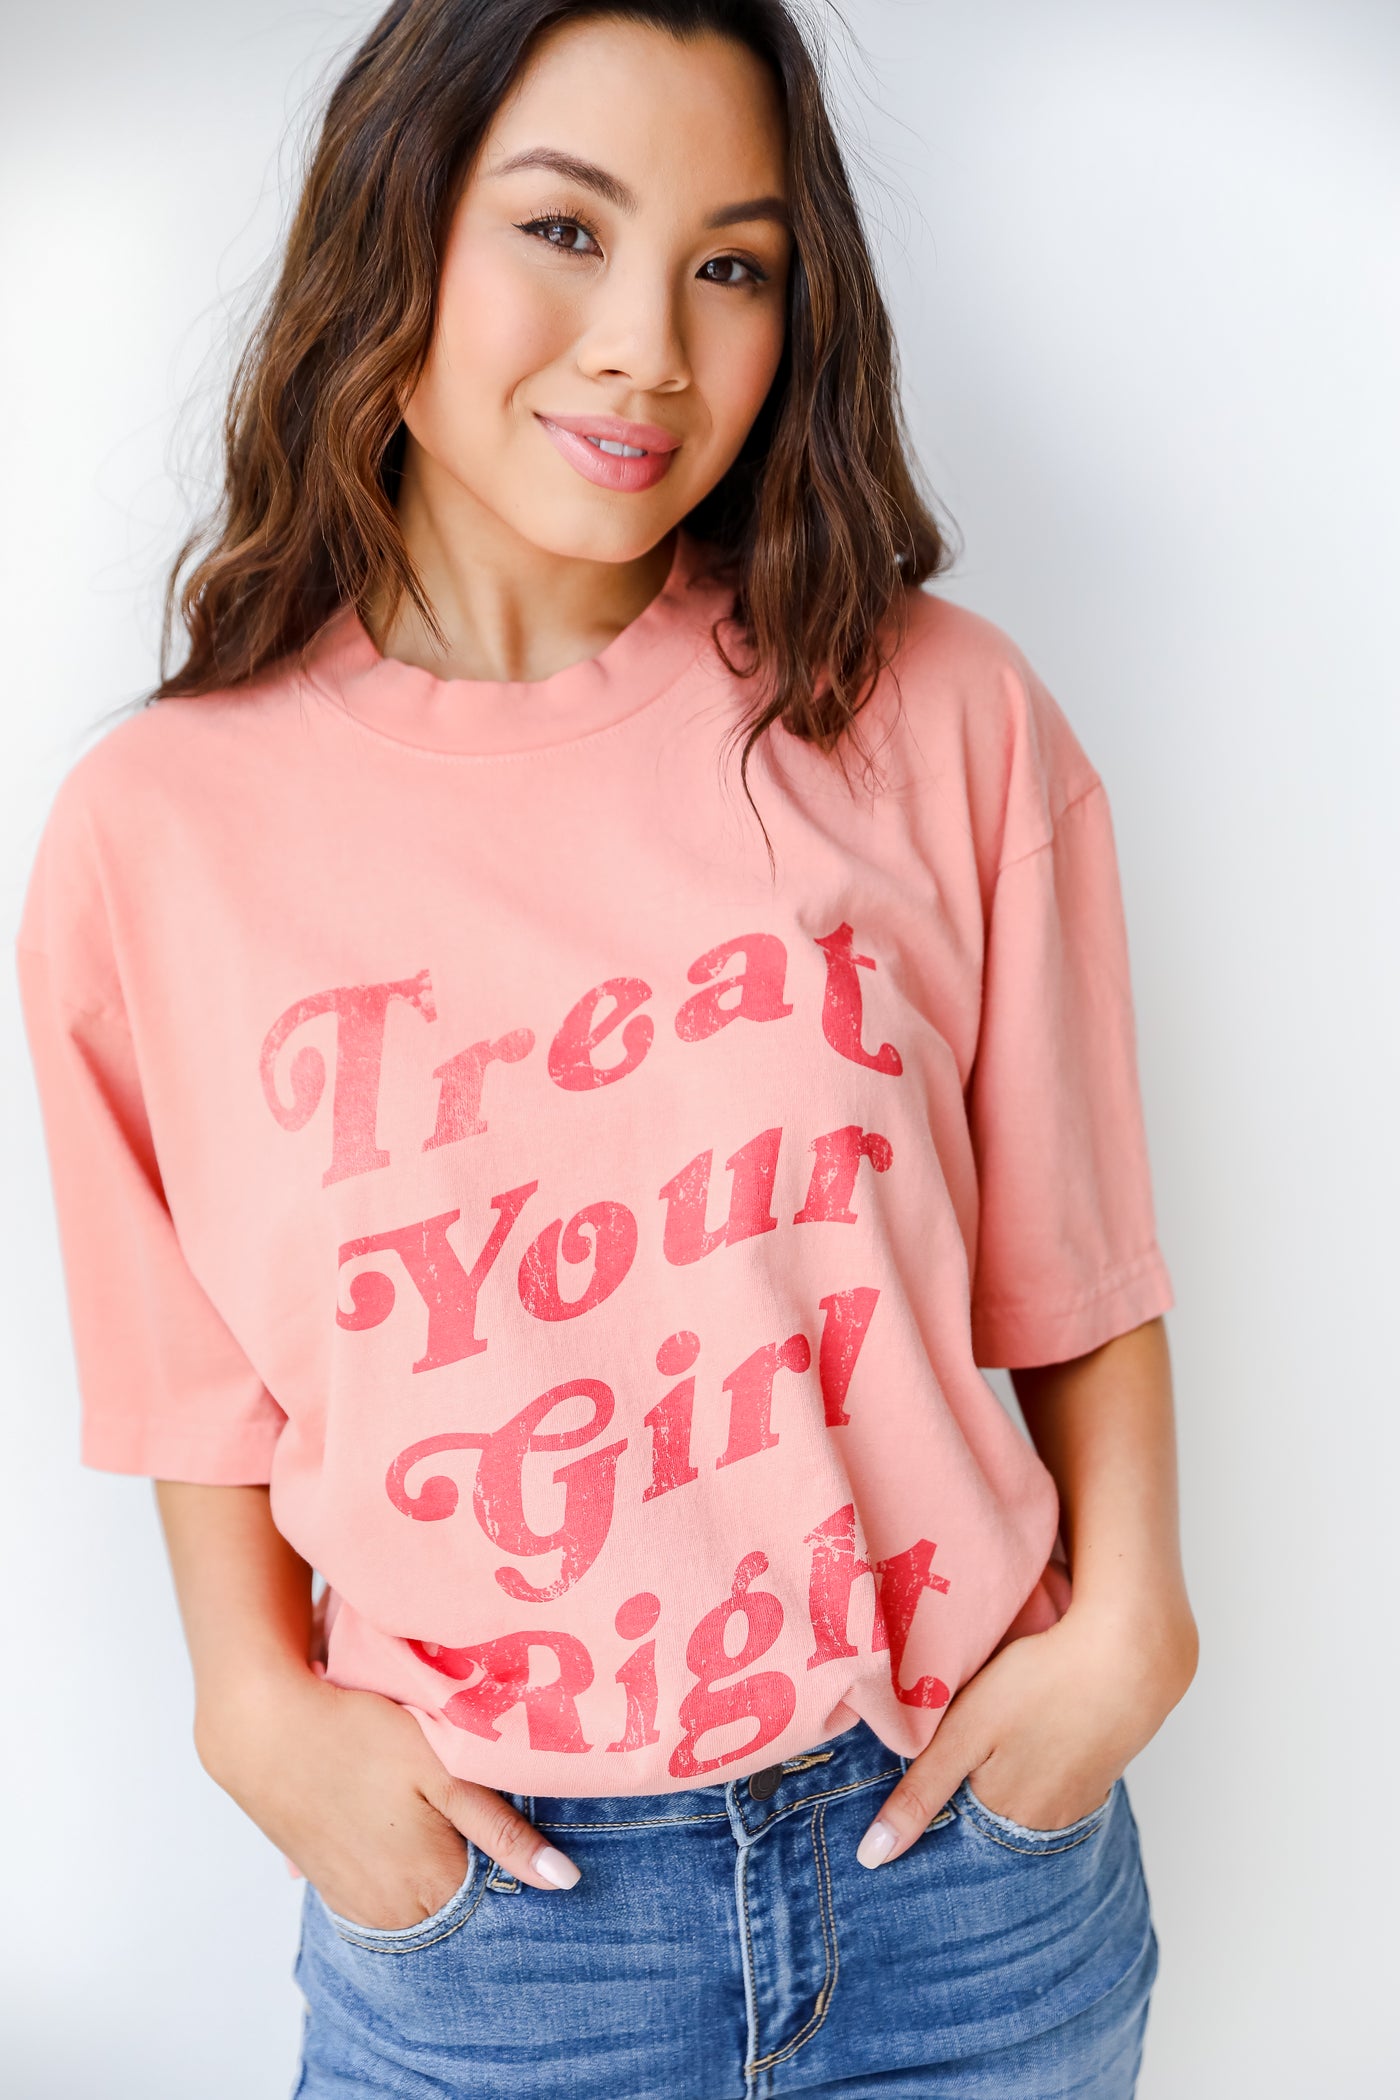 Treat Your Girl Right Graphic Tee close up